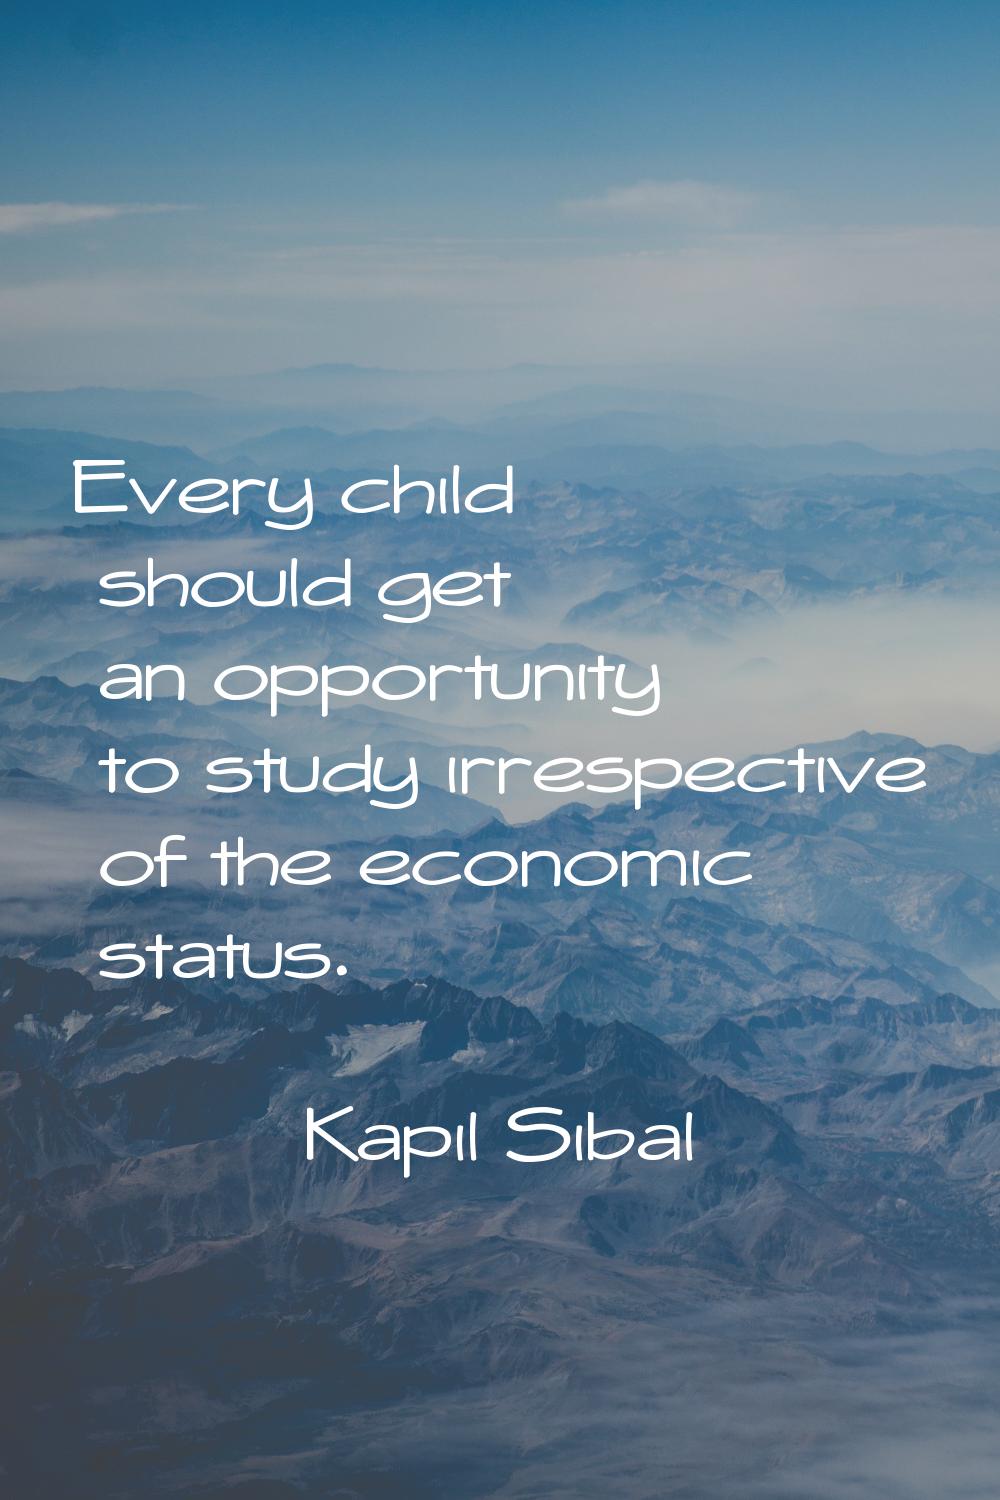 Every child should get an opportunity to study irrespective of the economic status.